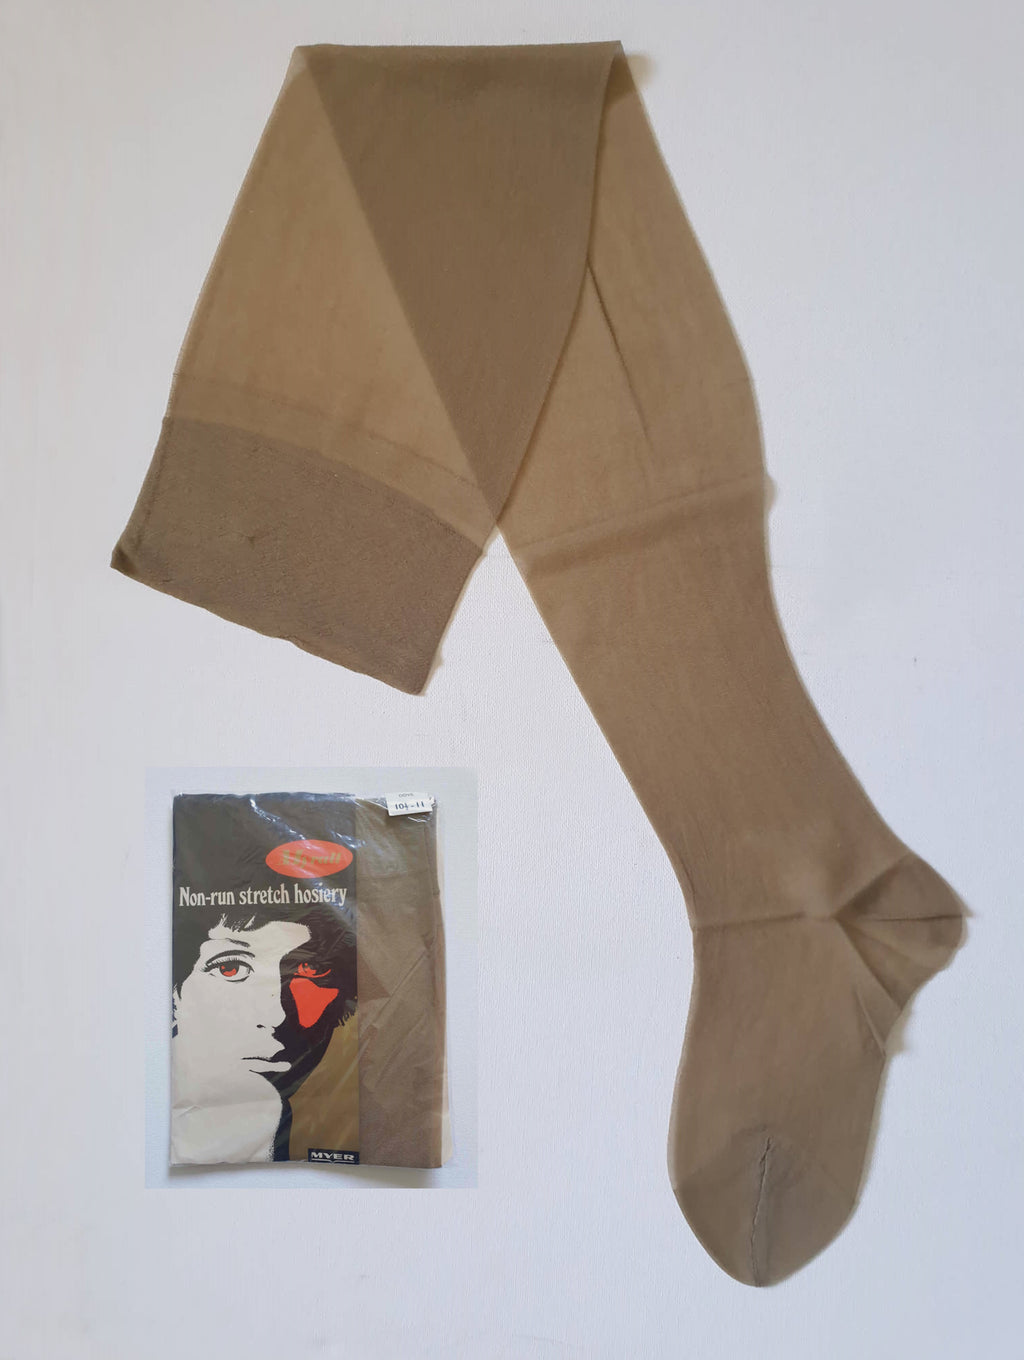 vintage 1960s or 1970s light grey stockings size 10.5 to 11